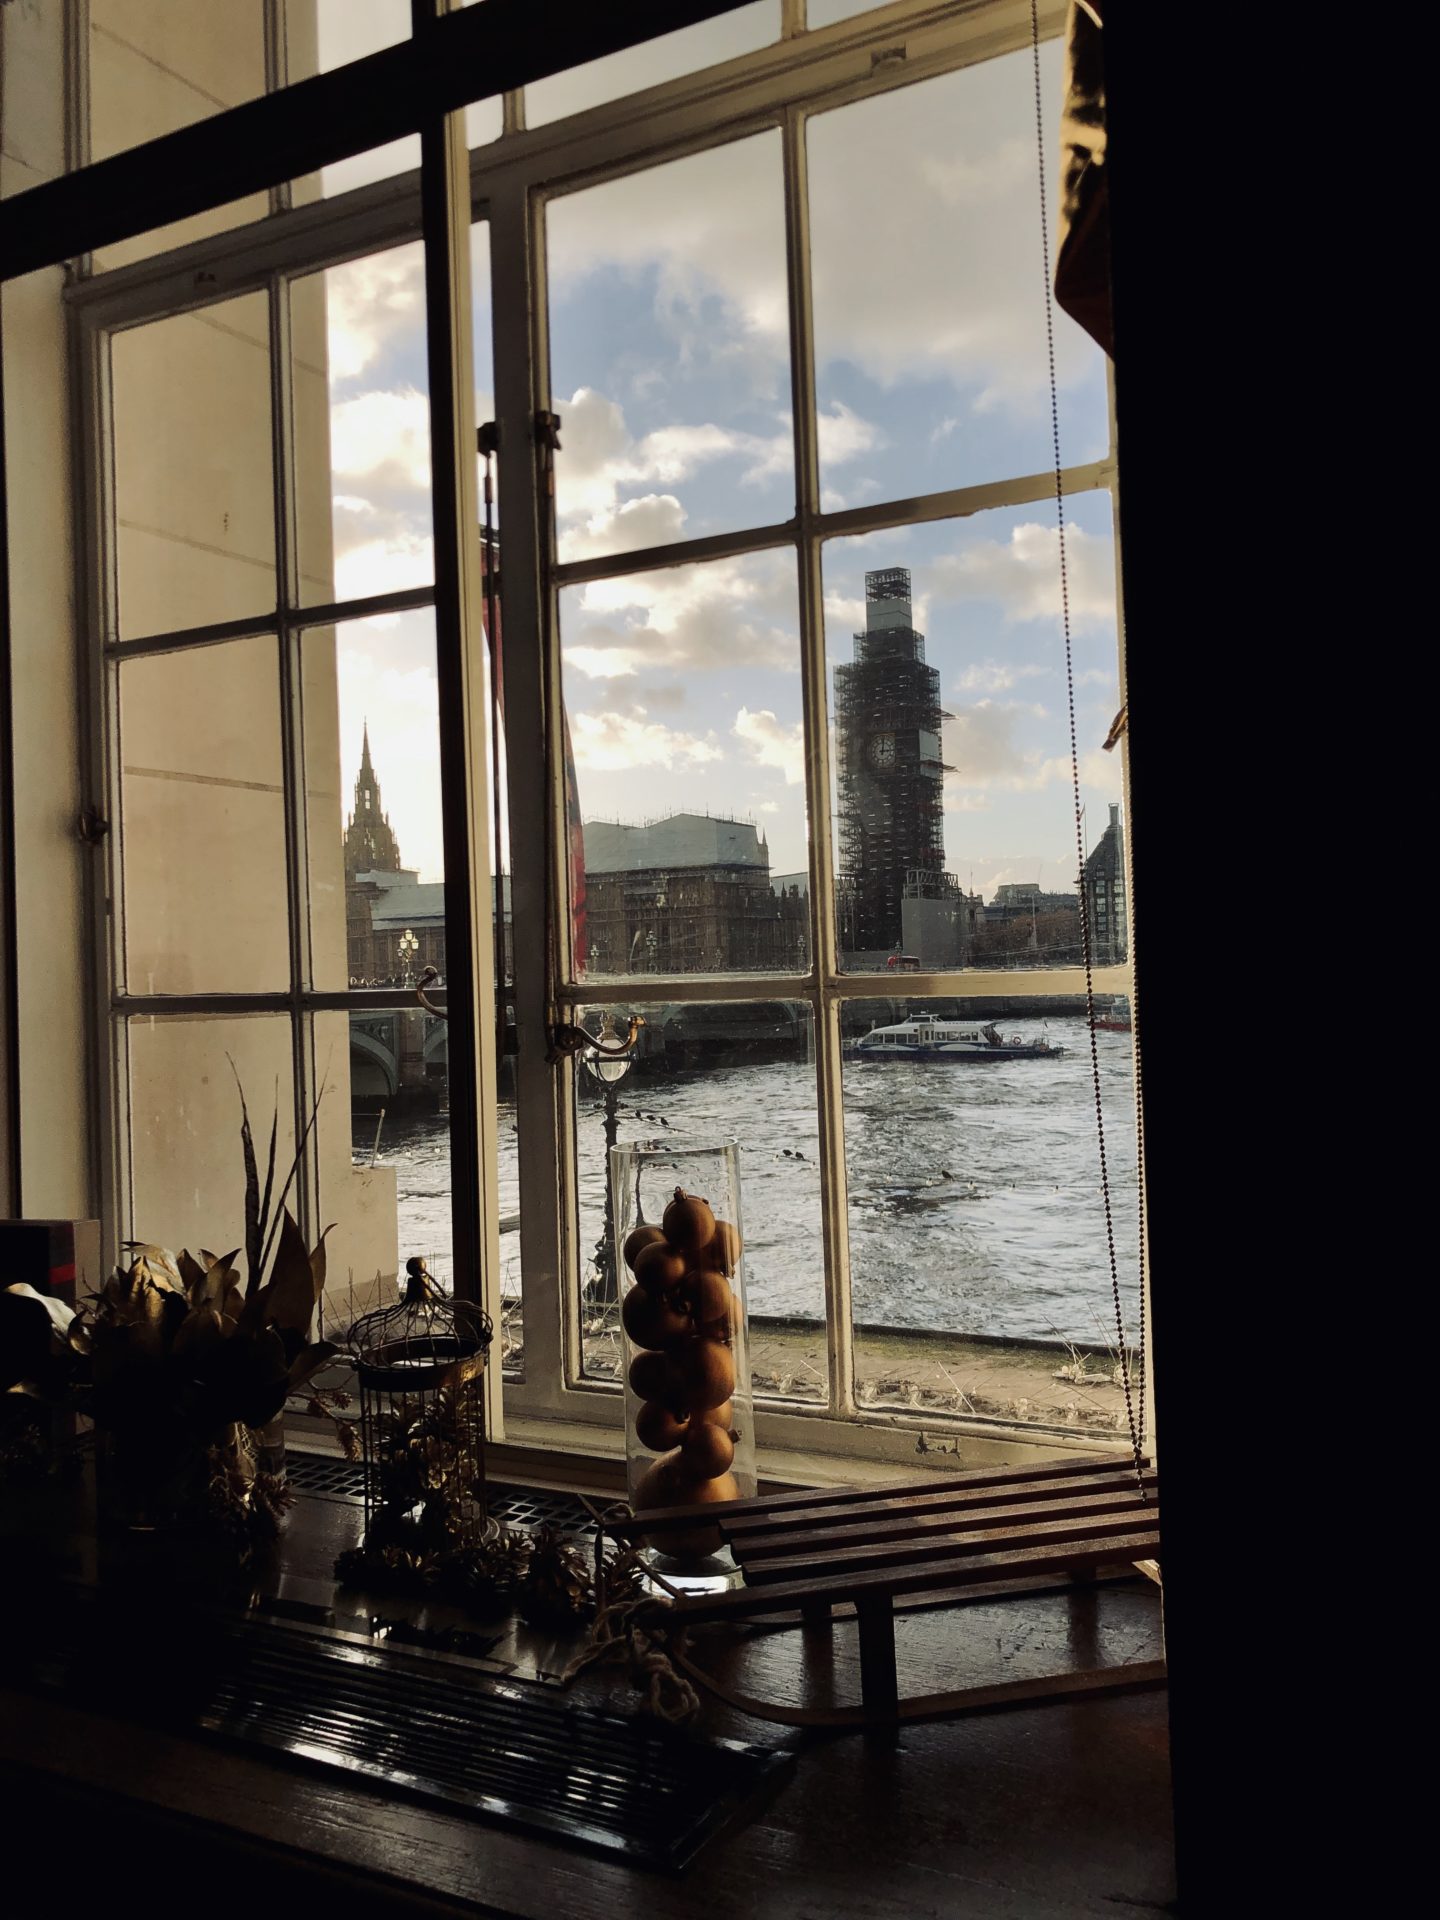  The Library at London Marriott County Hall overlooking the Thames and Big Ben.